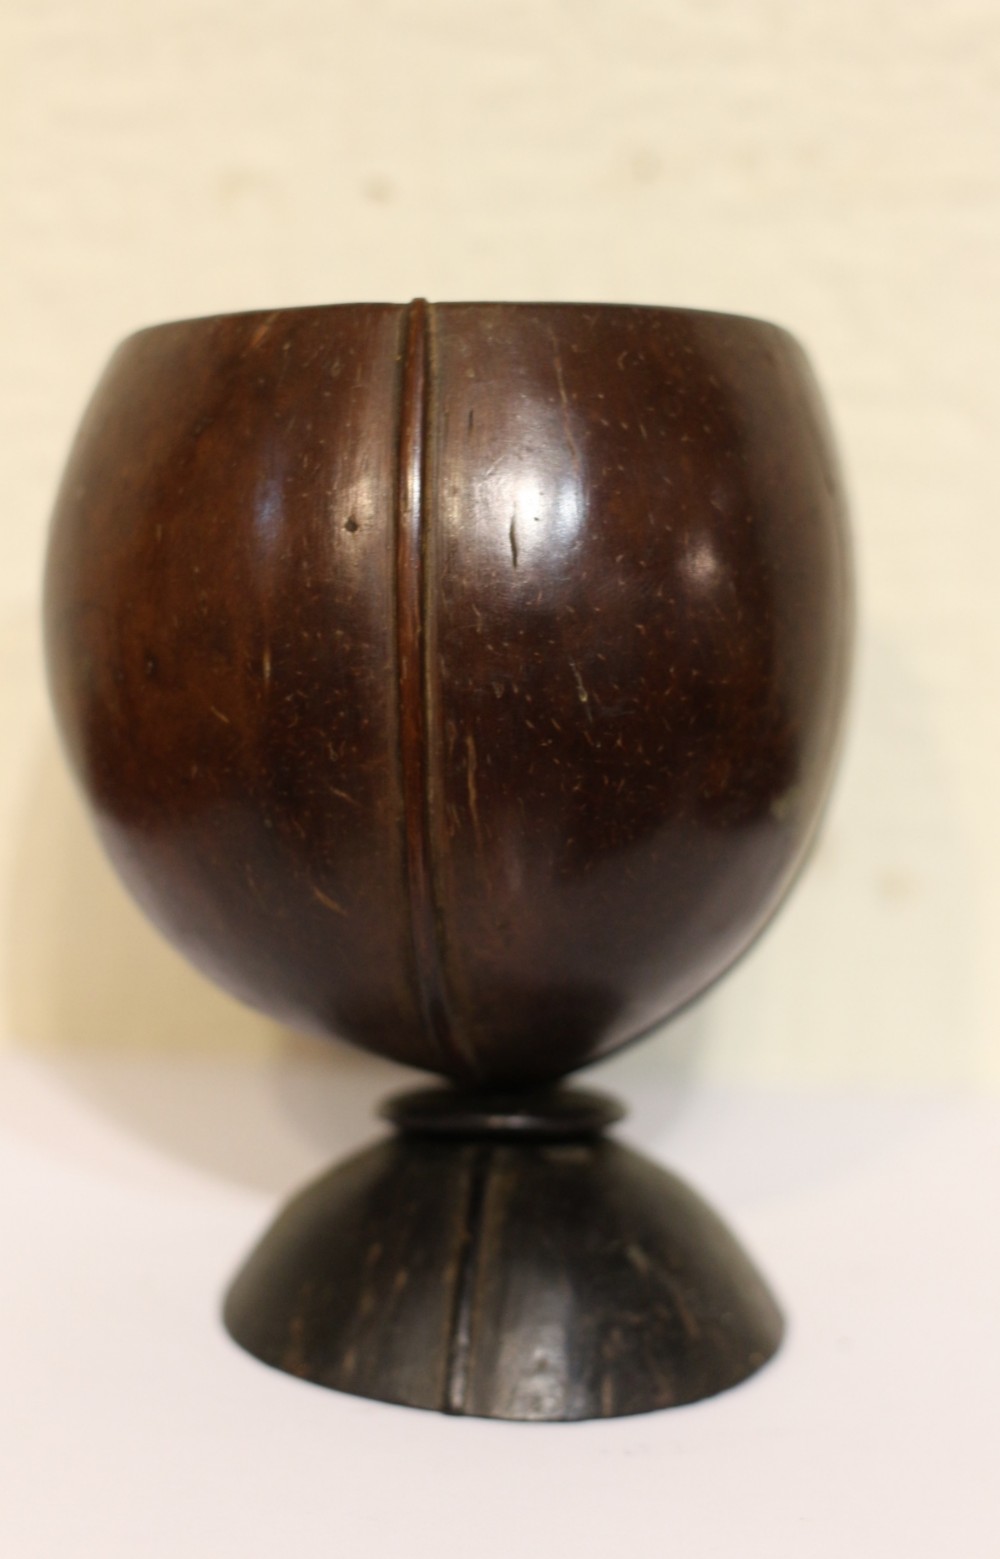 unusual early 19th century mariners coconut shell drinking vessel